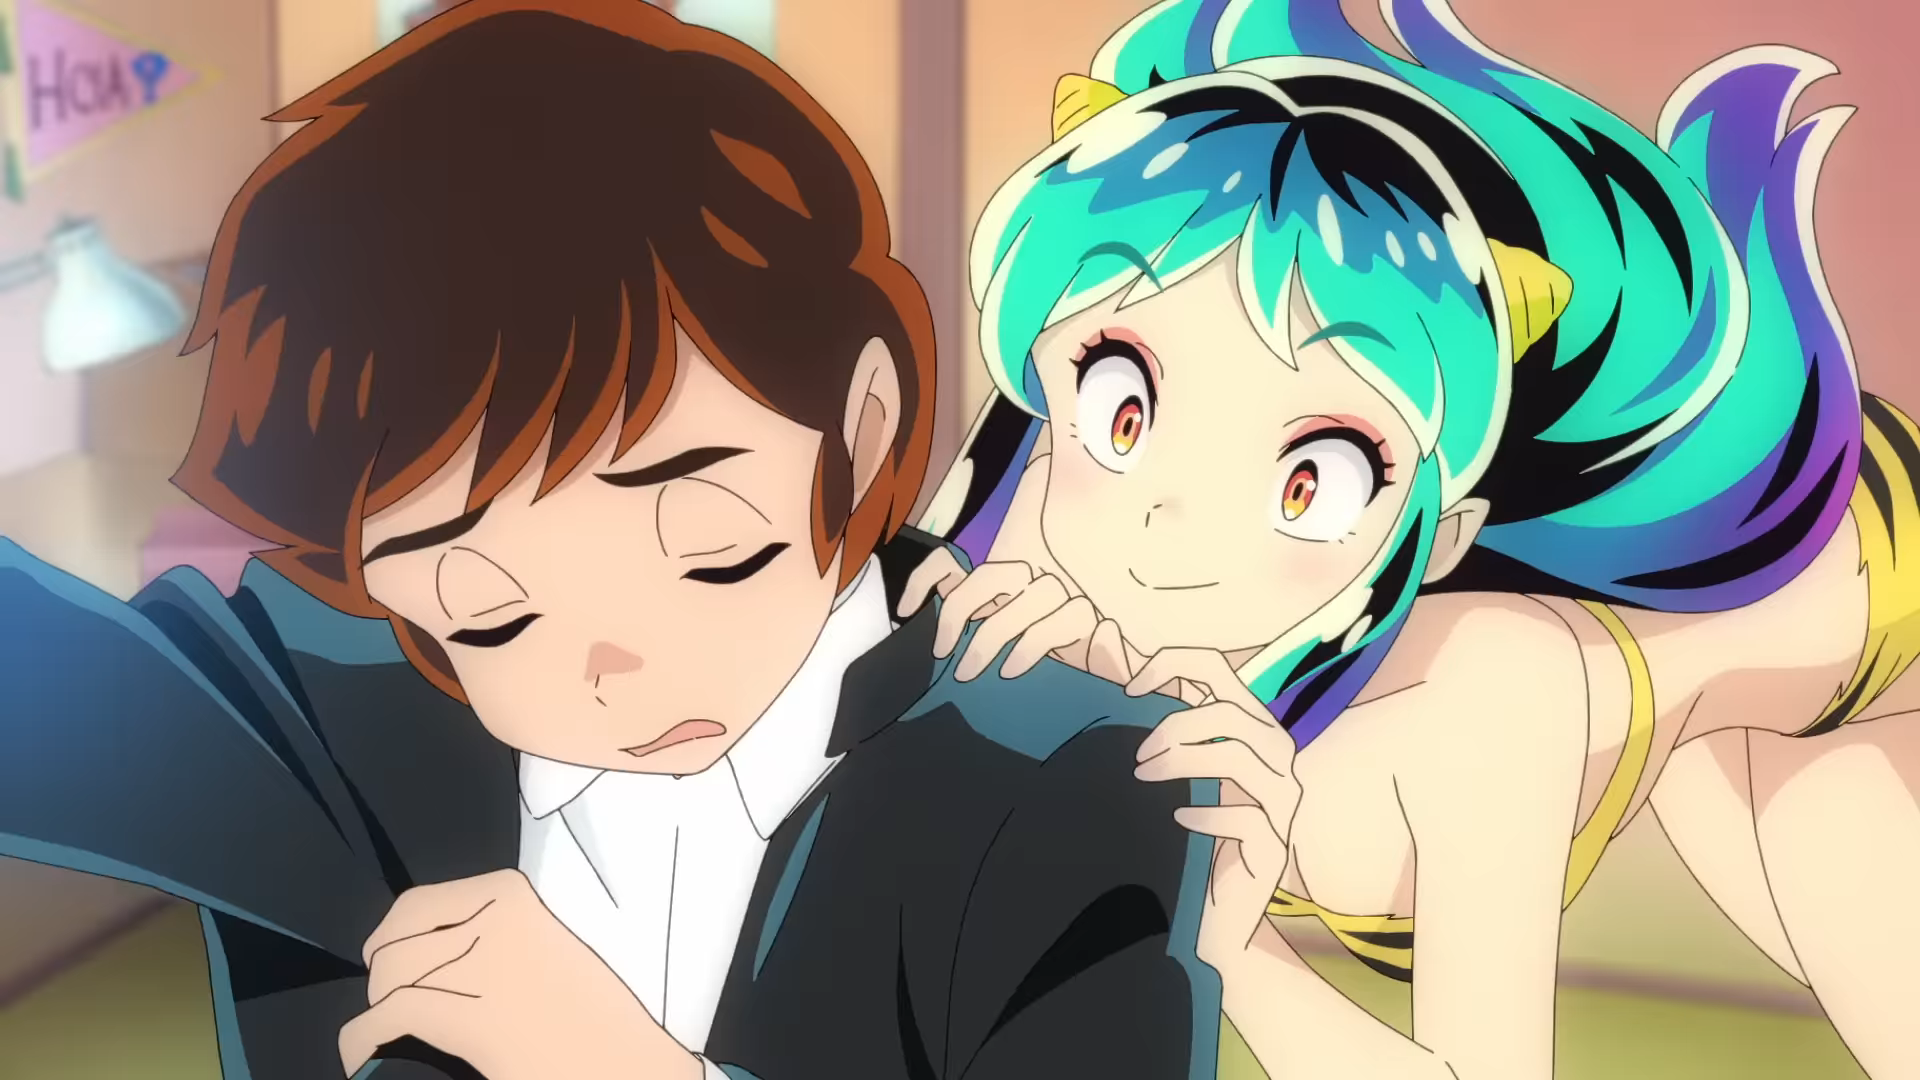 Why You Should Be Excited About The New Urusei Yatsura Anime